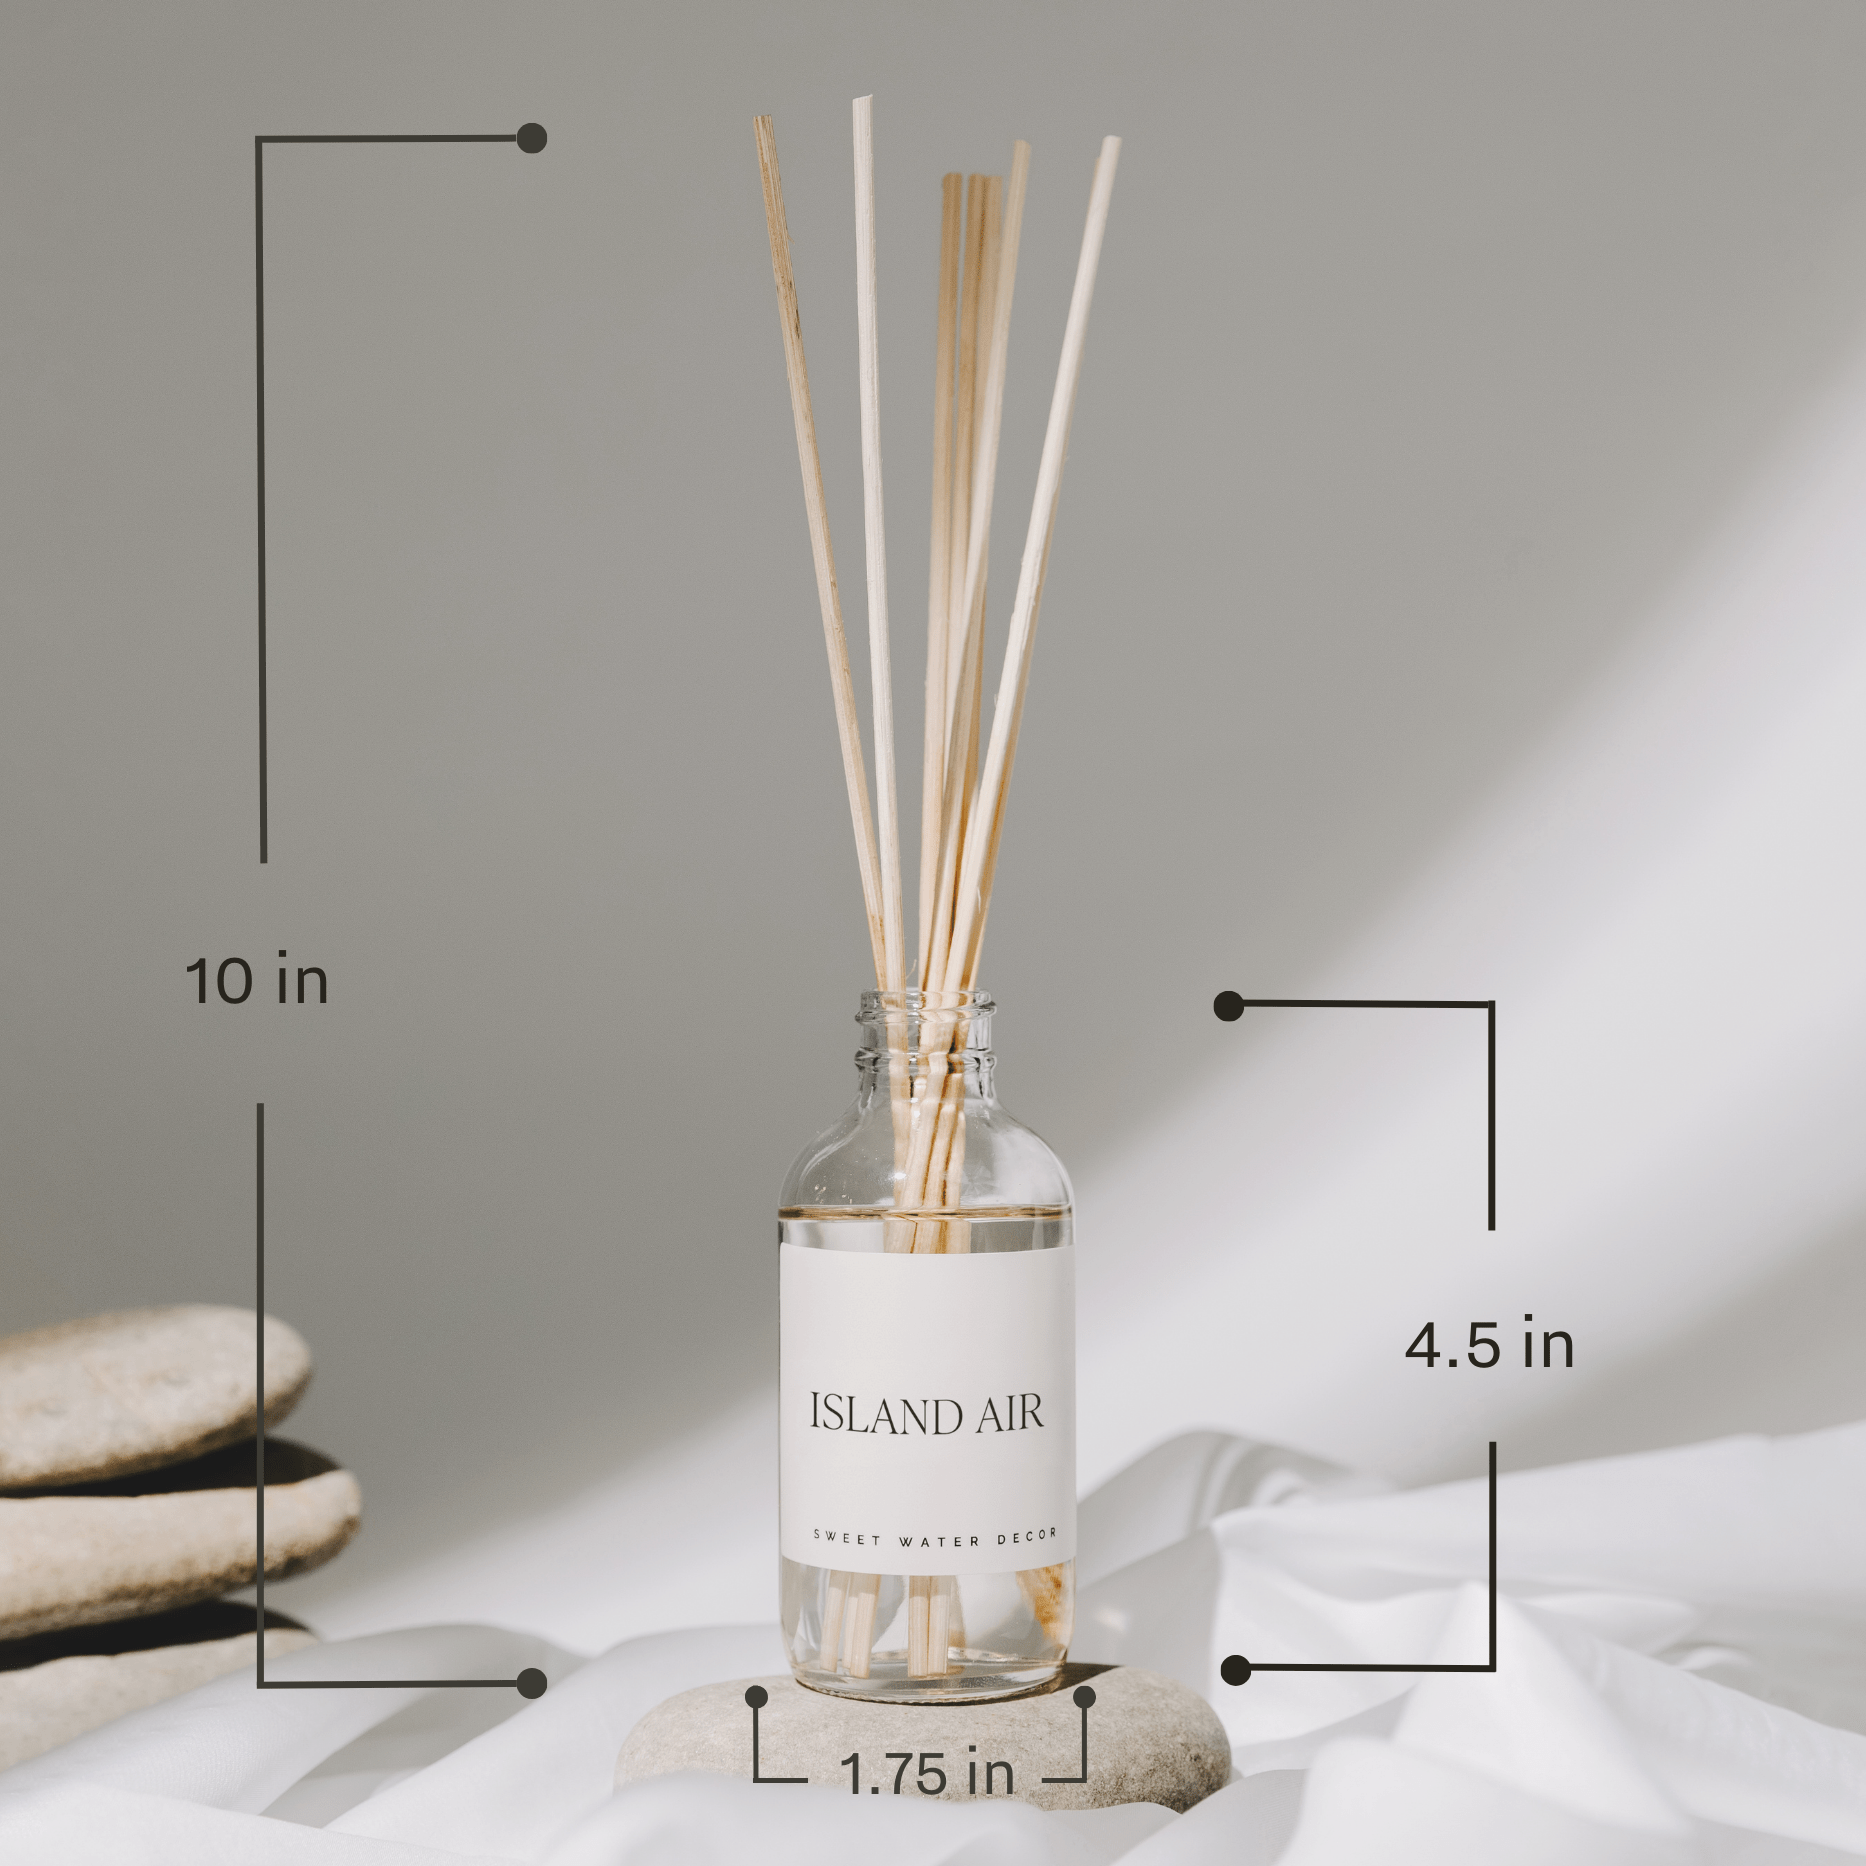 Lavender and Sage Reed Diffuser - Gifts & Home Decor Dainty